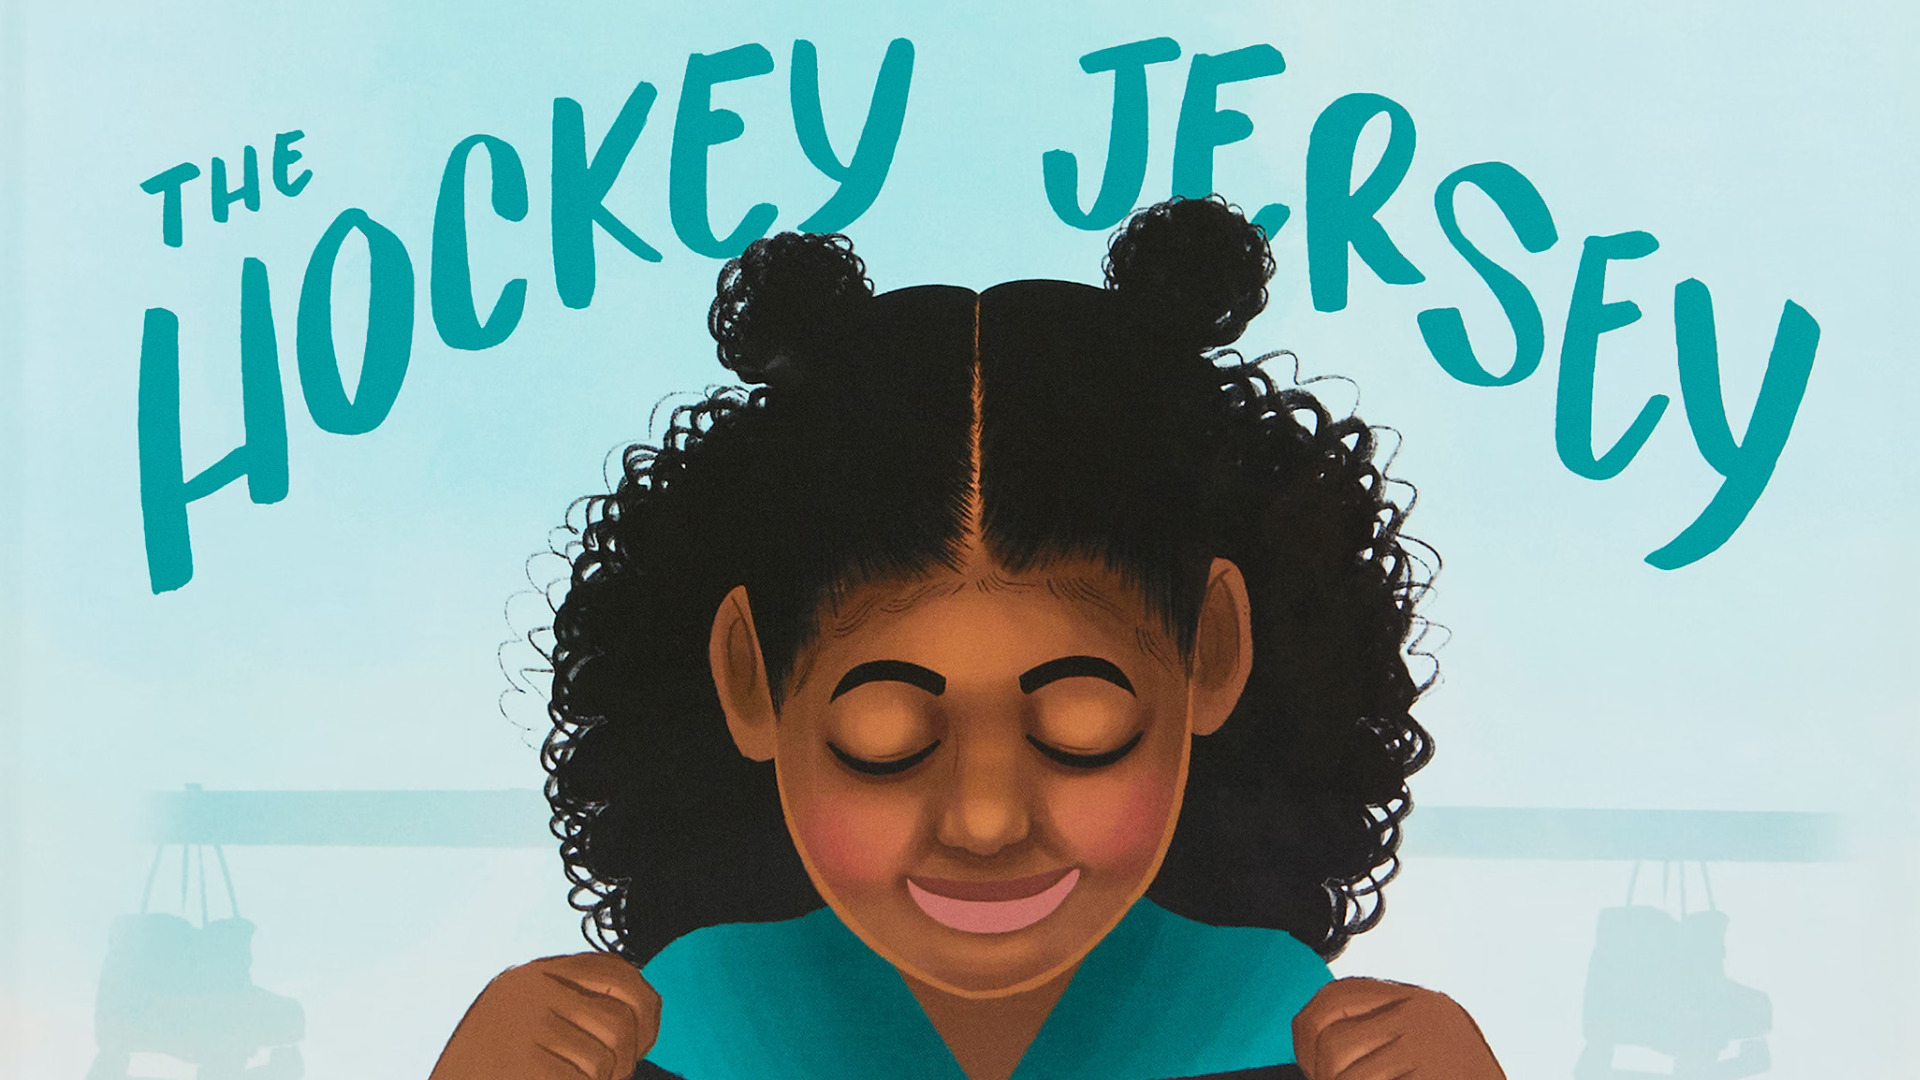 “The Hockey Jersey” allows everyone to see themselves in their favourite game